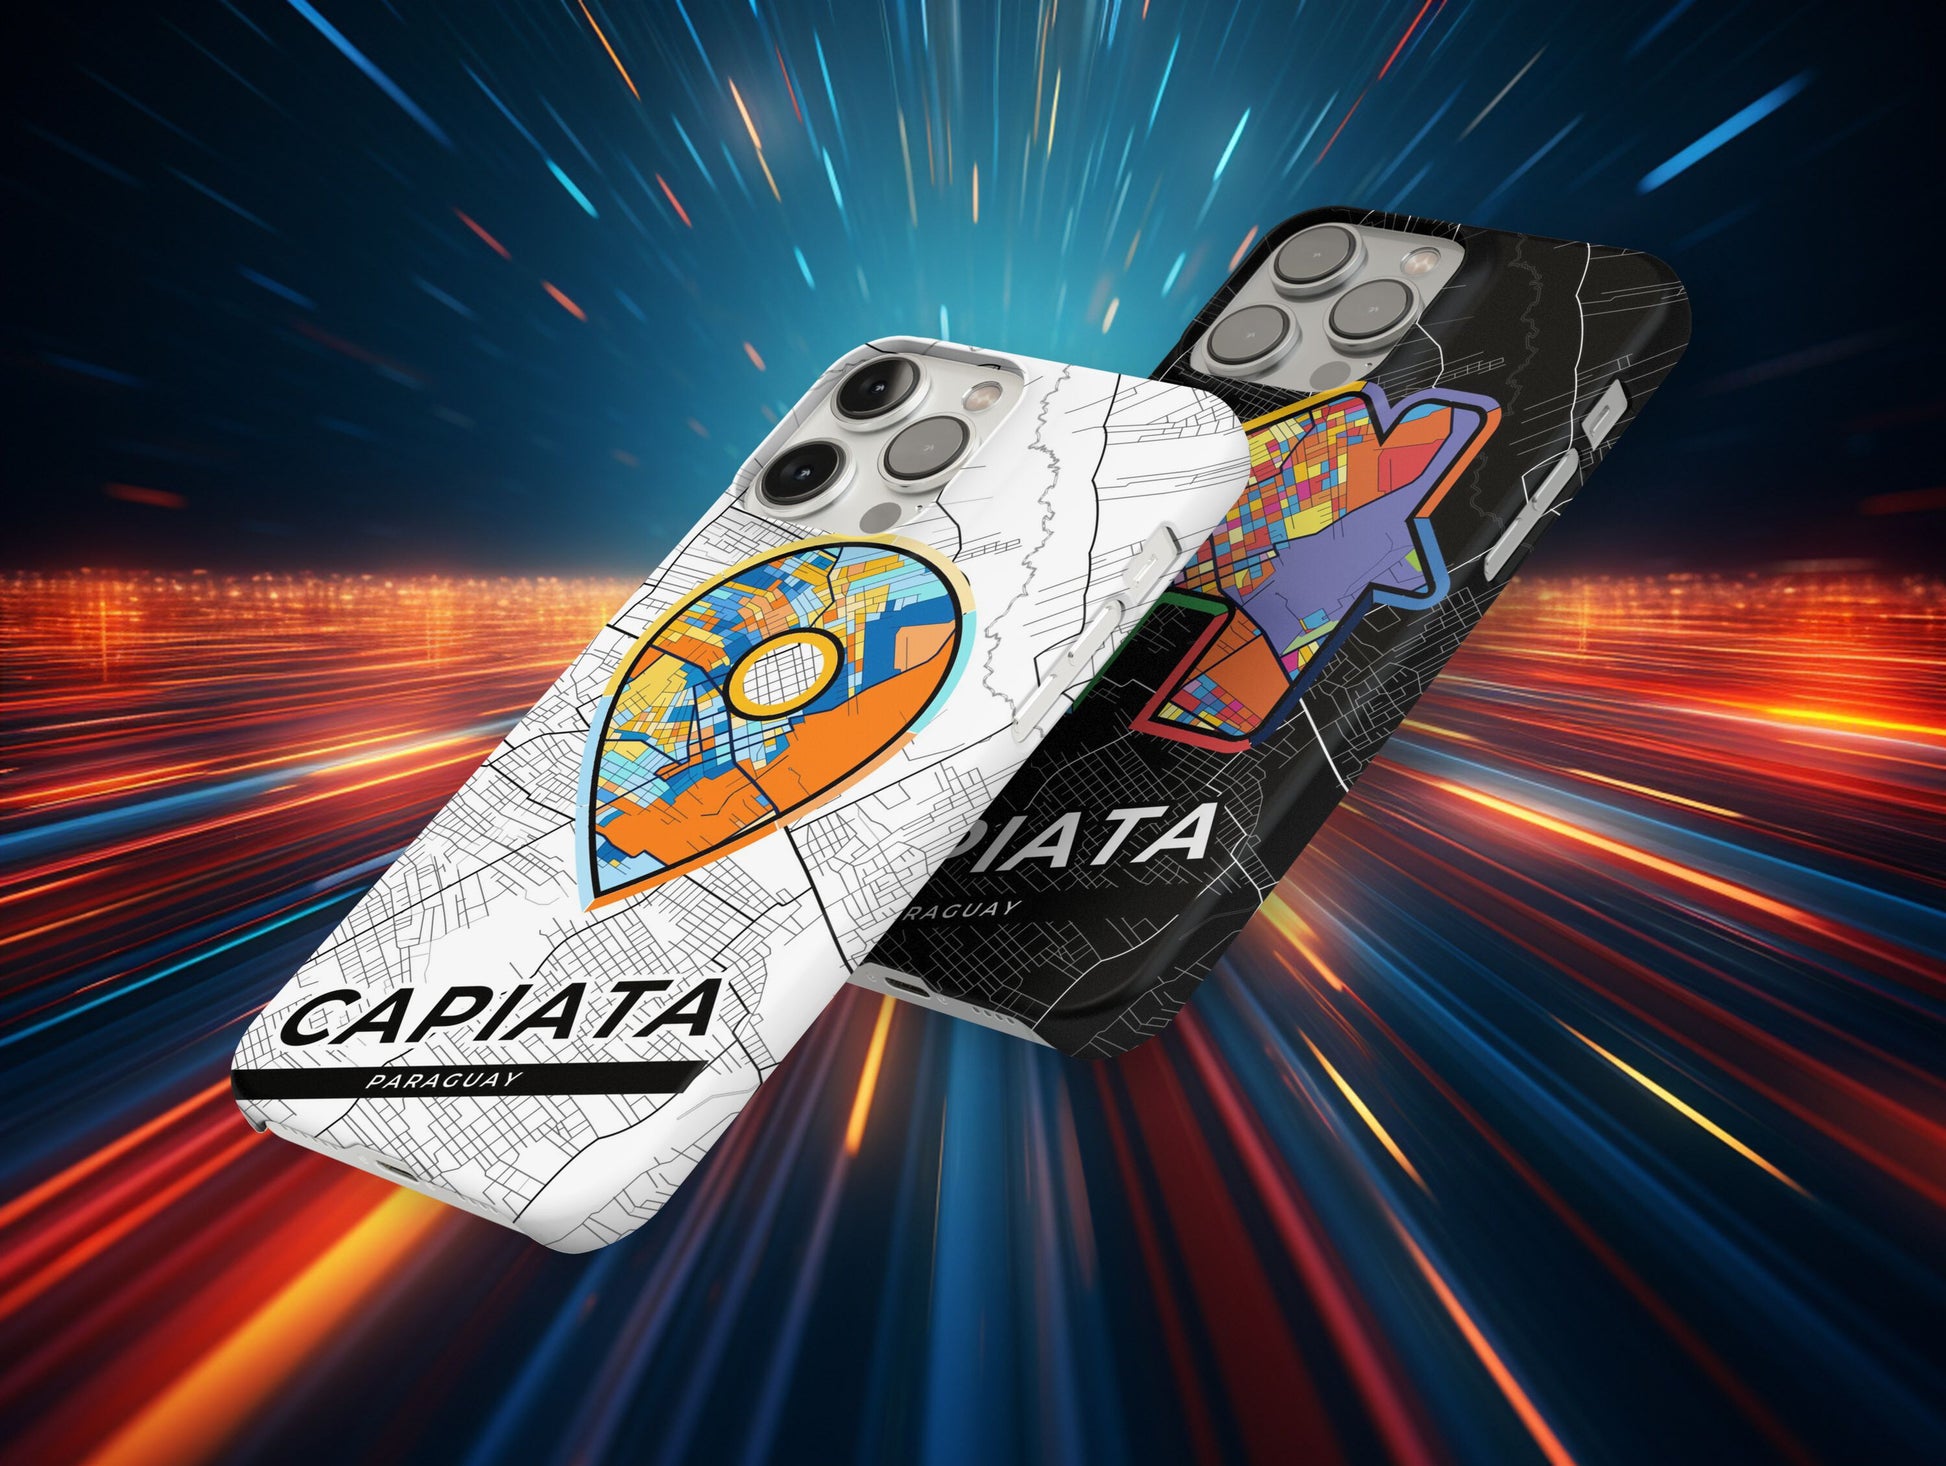 Capiata Paraguay slim phone case with colorful icon. Birthday, wedding or housewarming gift. Couple match cases.